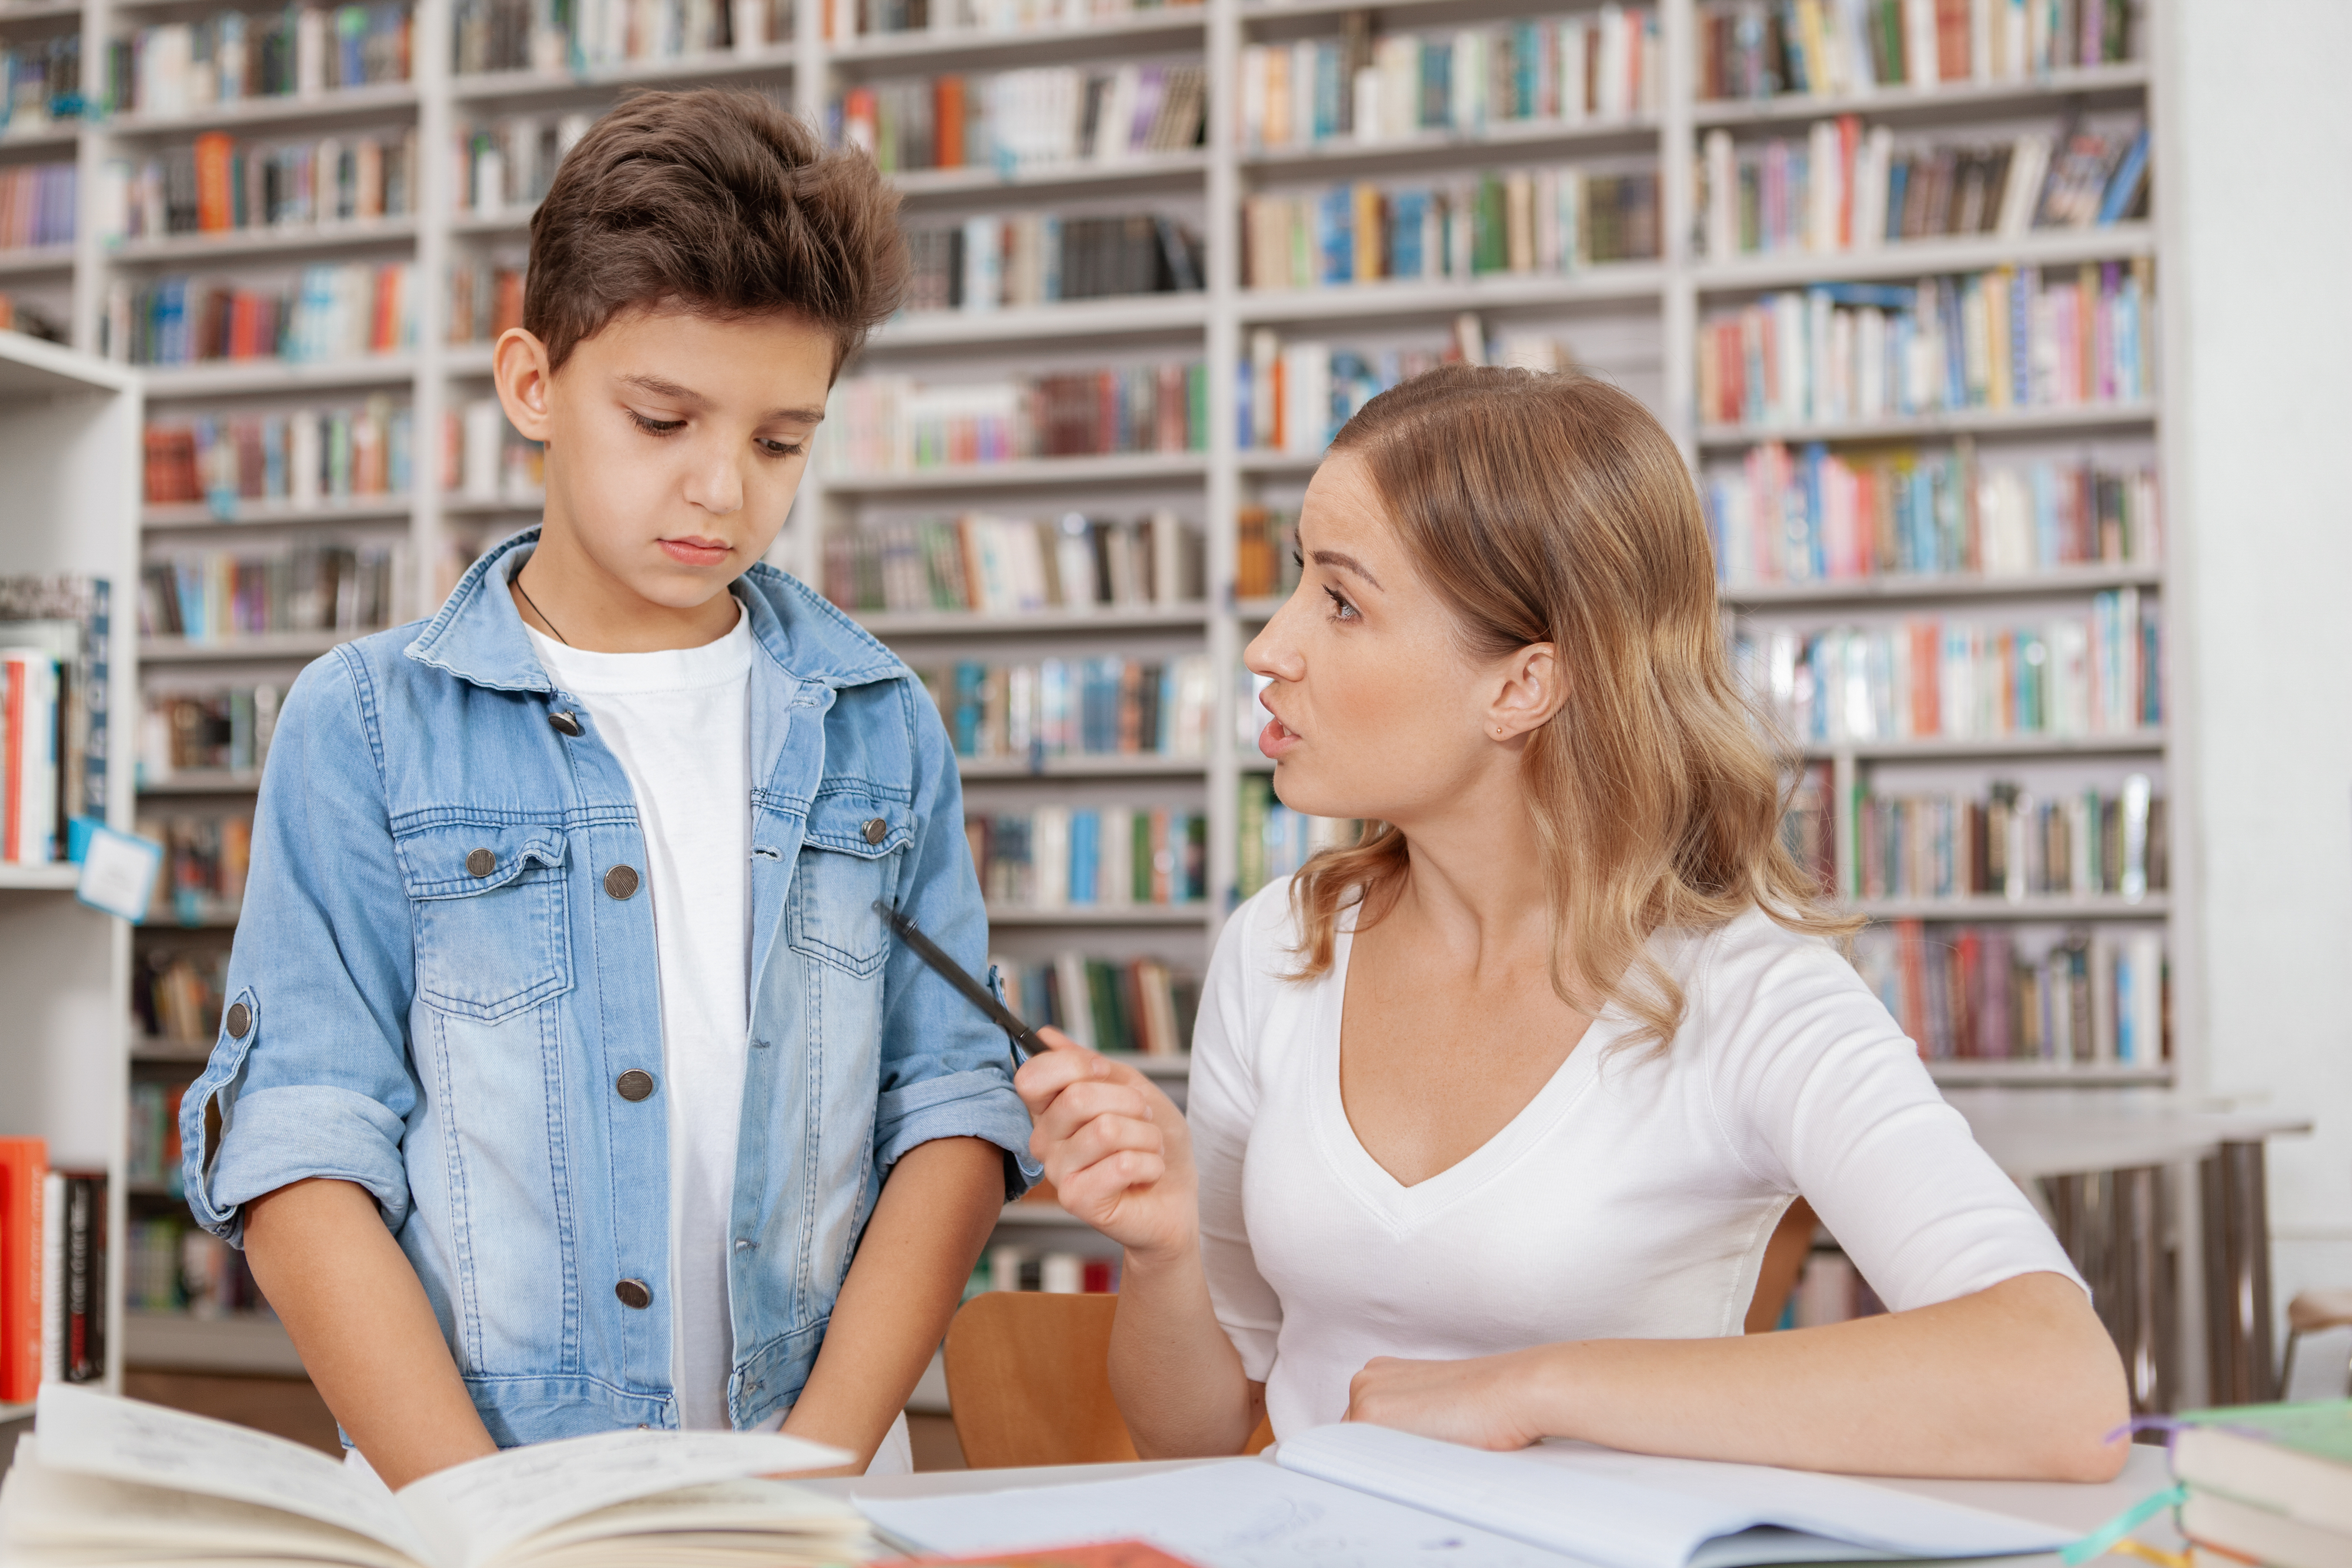 Woman and boy engaged in discussion with open books on the table in a library setting